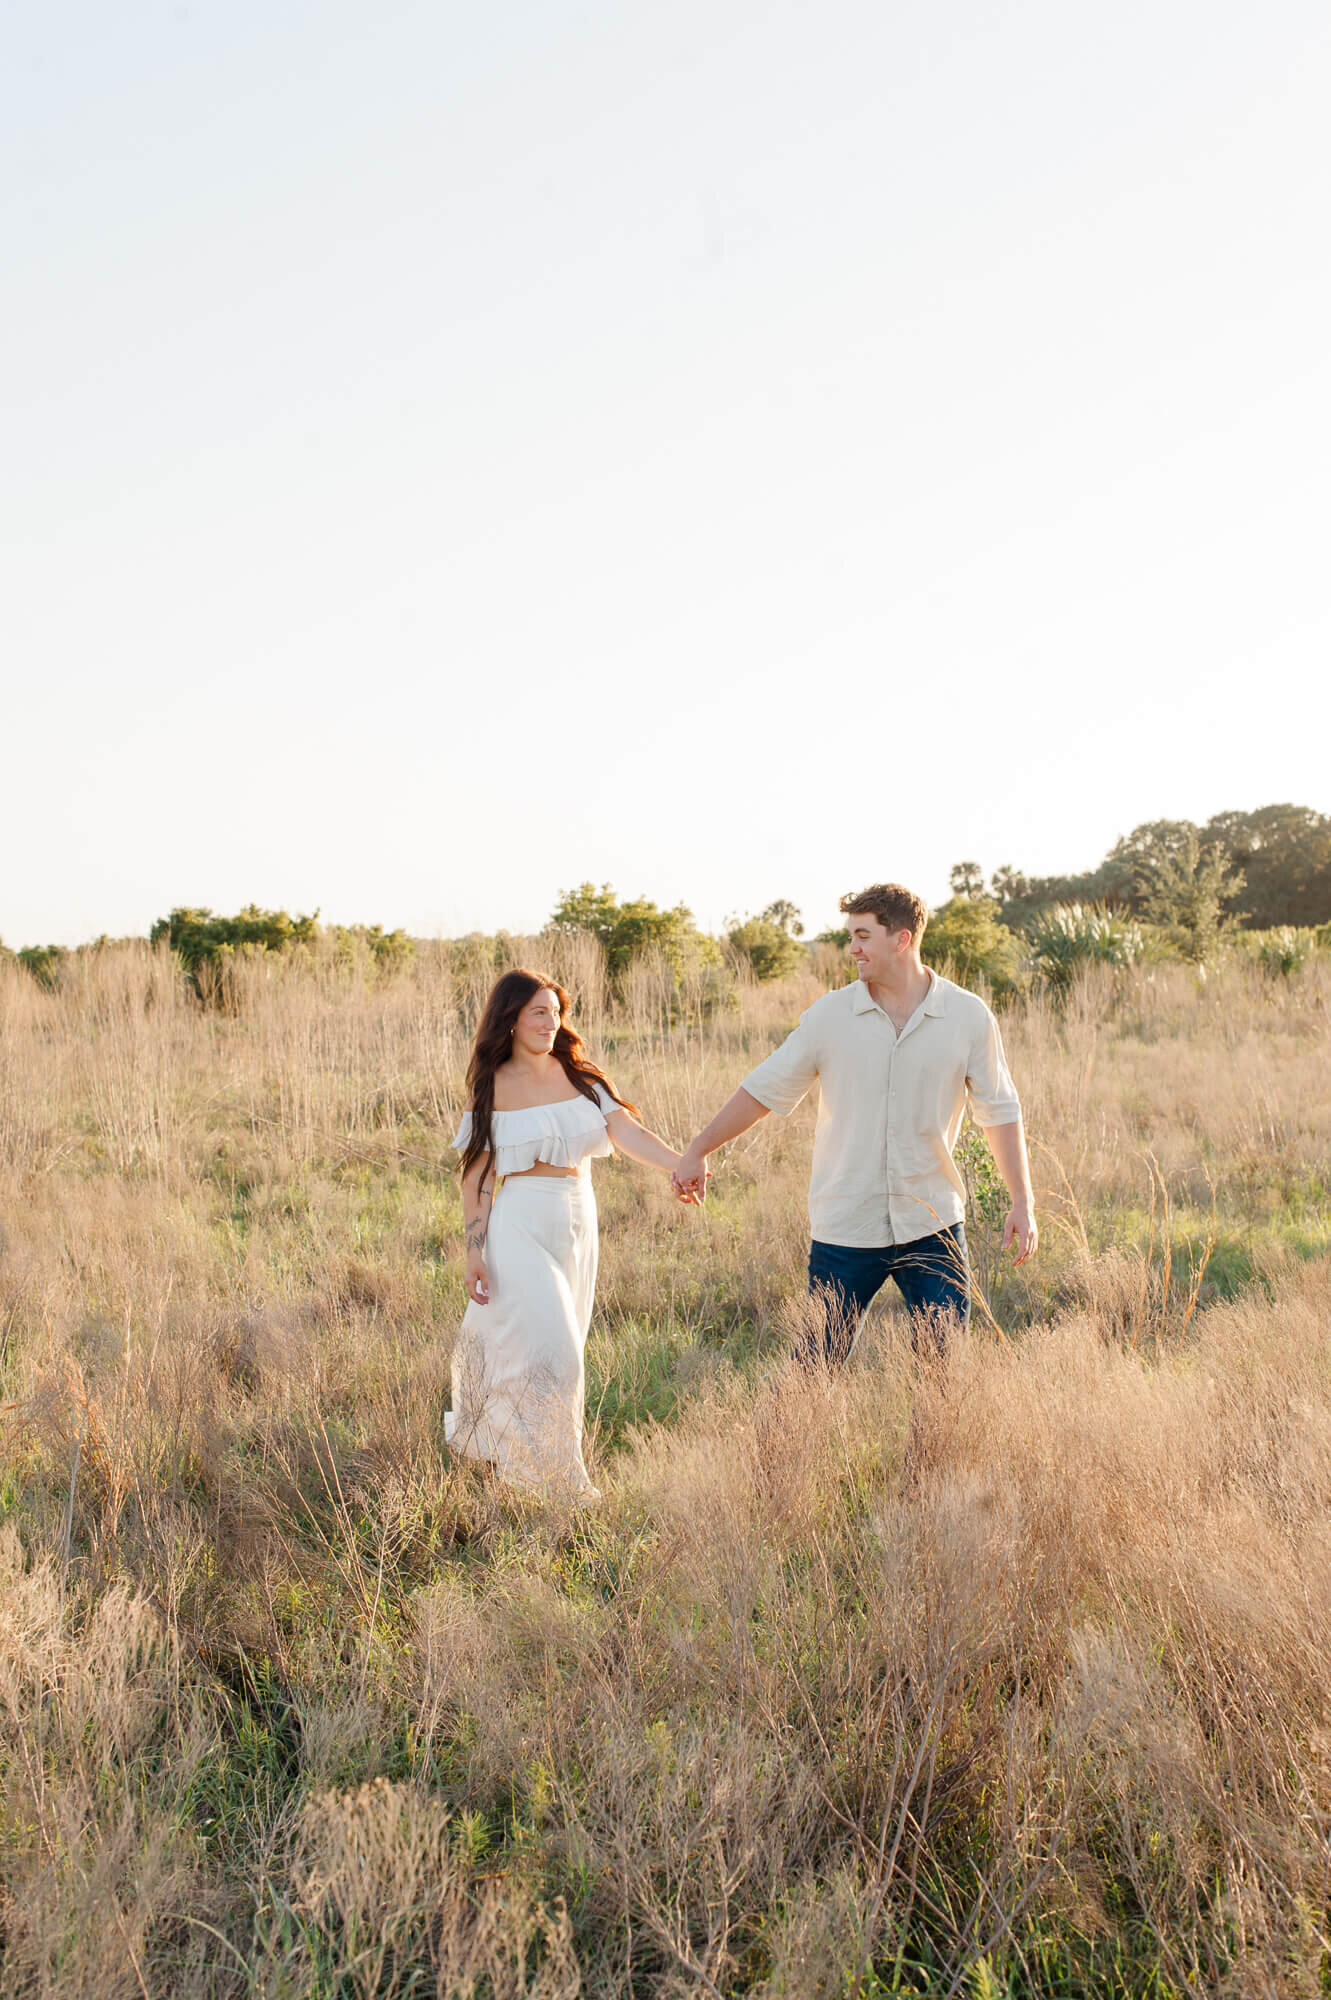 Couple holding hands and walking through a tall grass field in Orlando